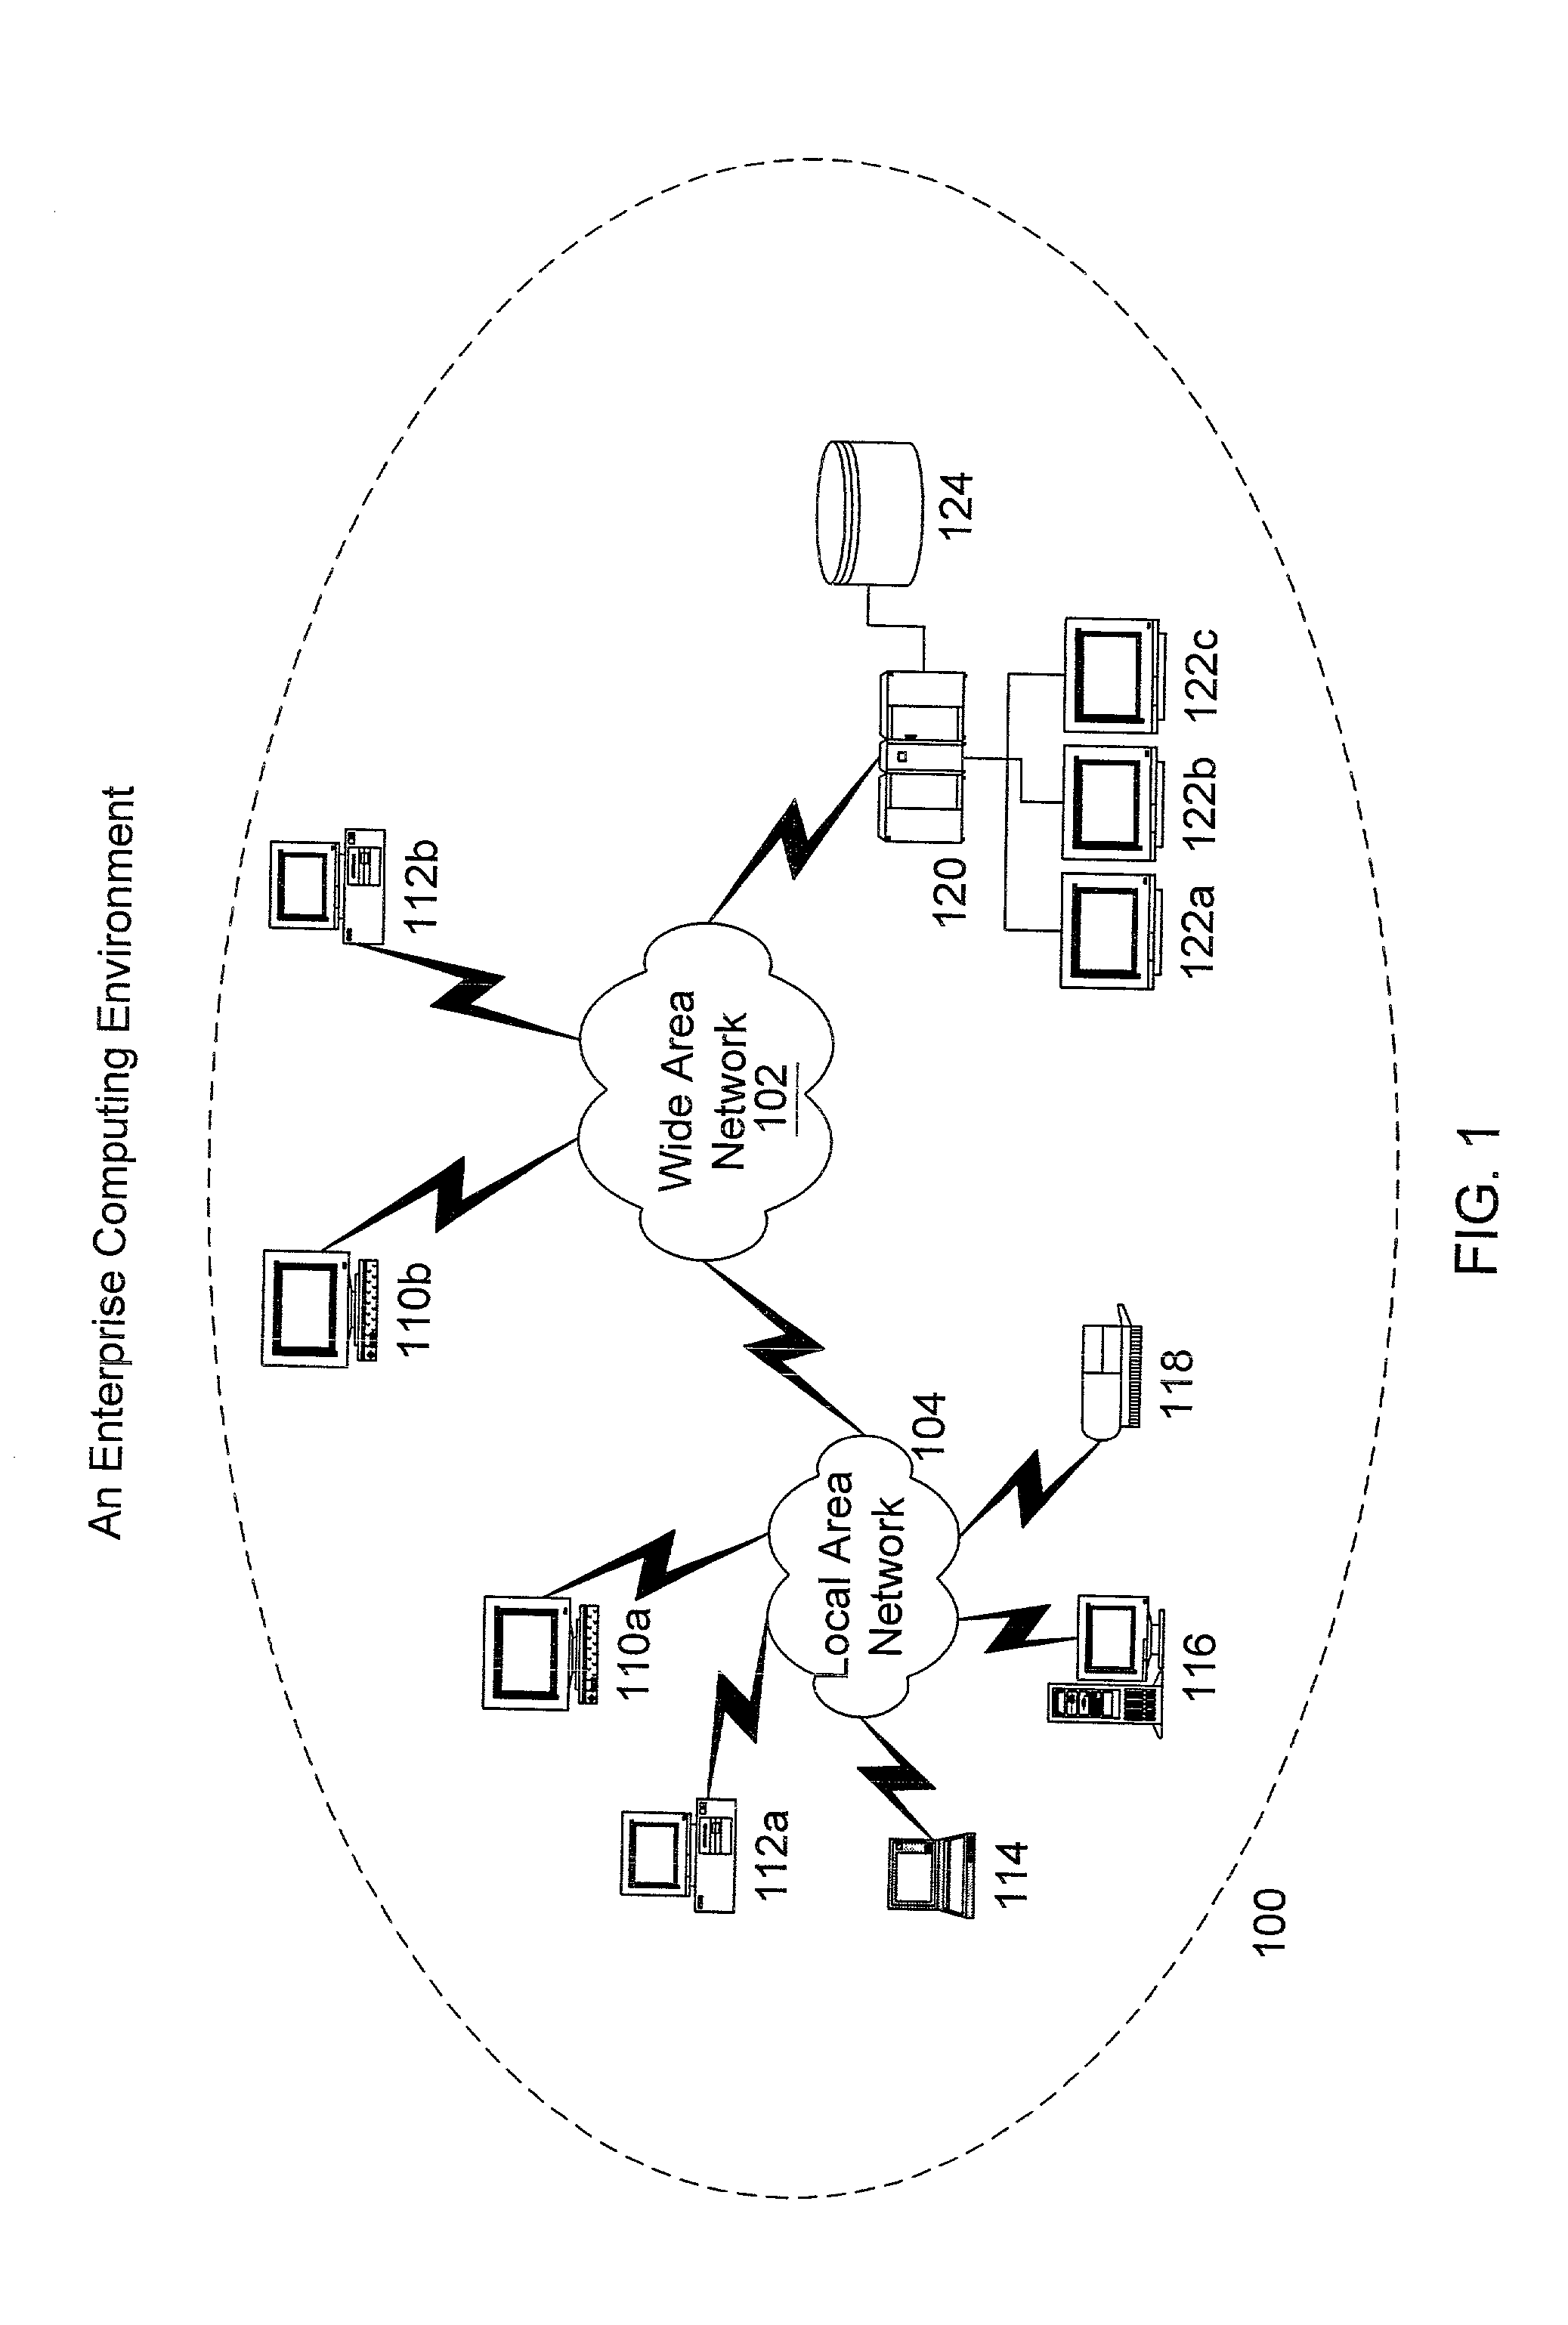 System and method for automatic workload characterization